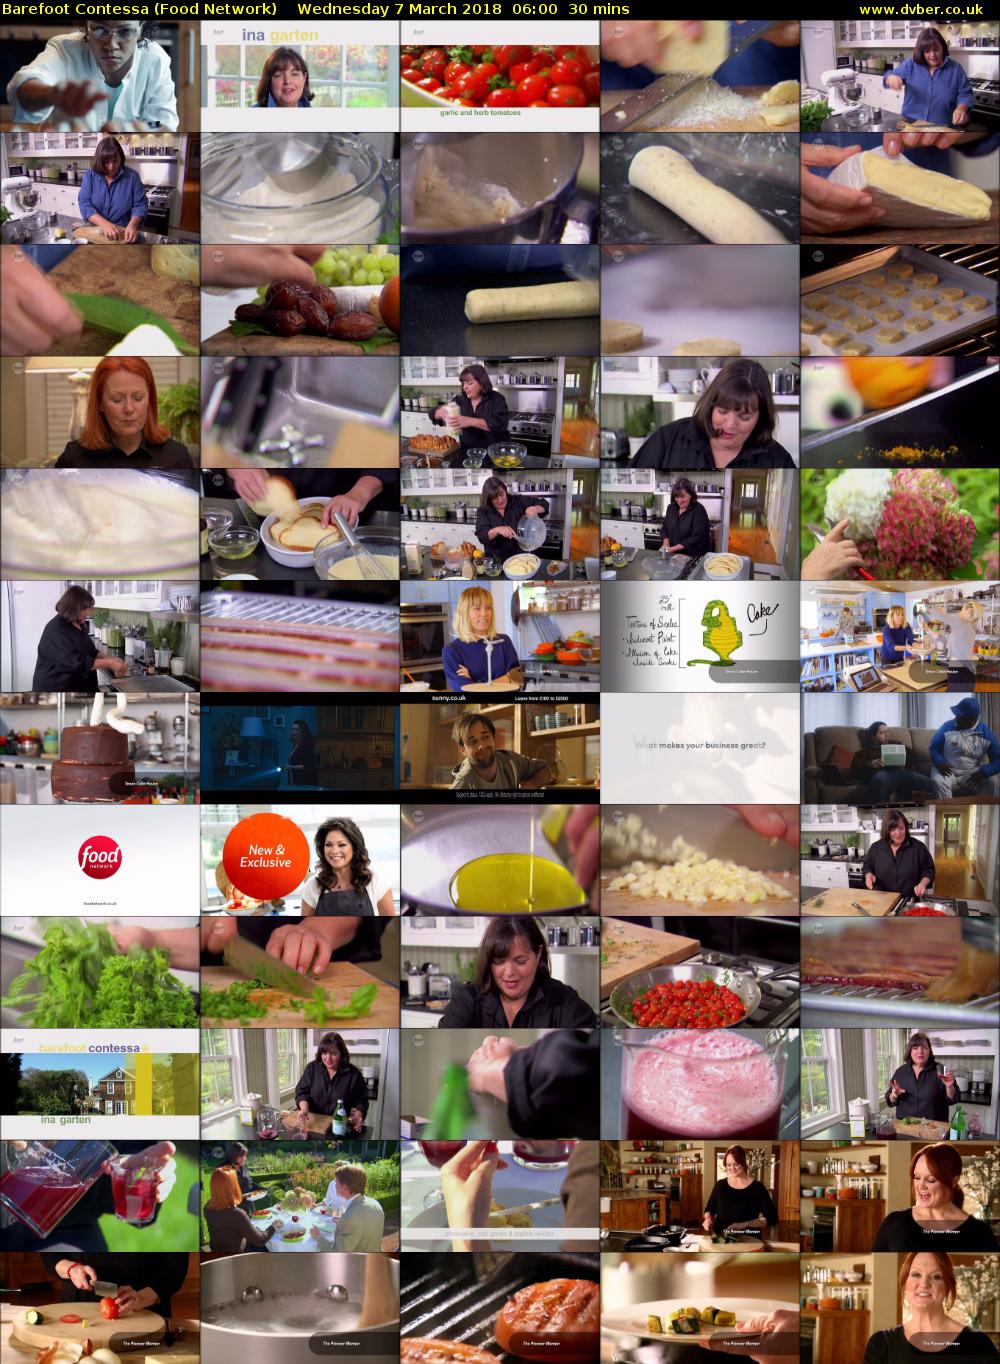 Barefoot Contessa (Food Network) Wednesday 7 March 2018 06:00 - 06:30